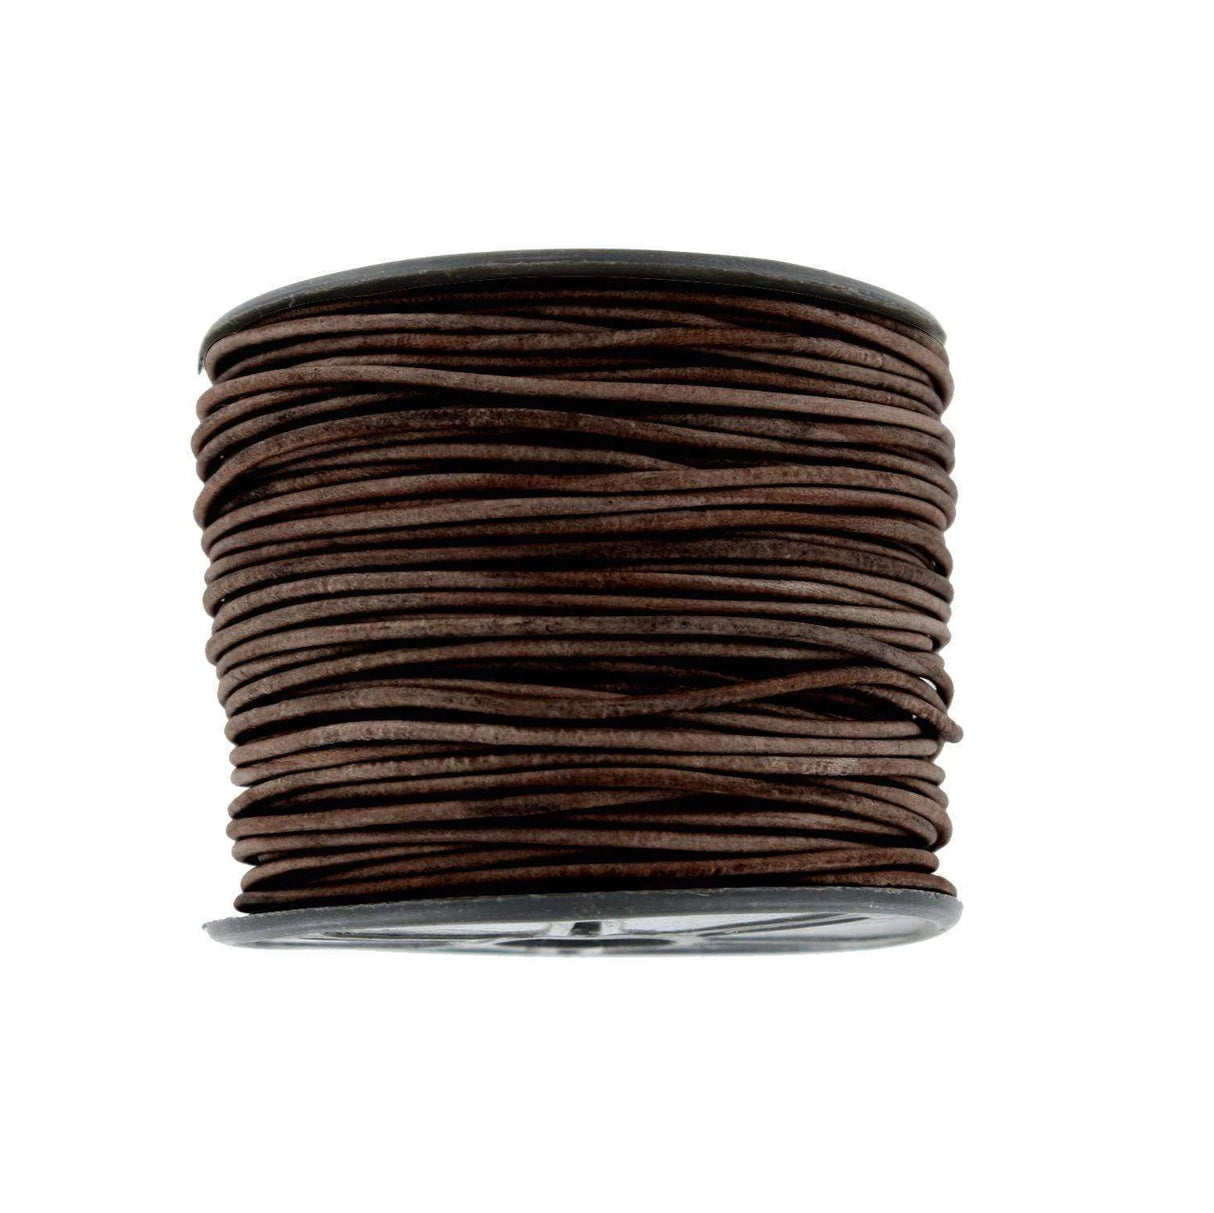 1/16" (1.5mm) Antique Brown, Round Cord, Leather, #M-1630-ANTBRO